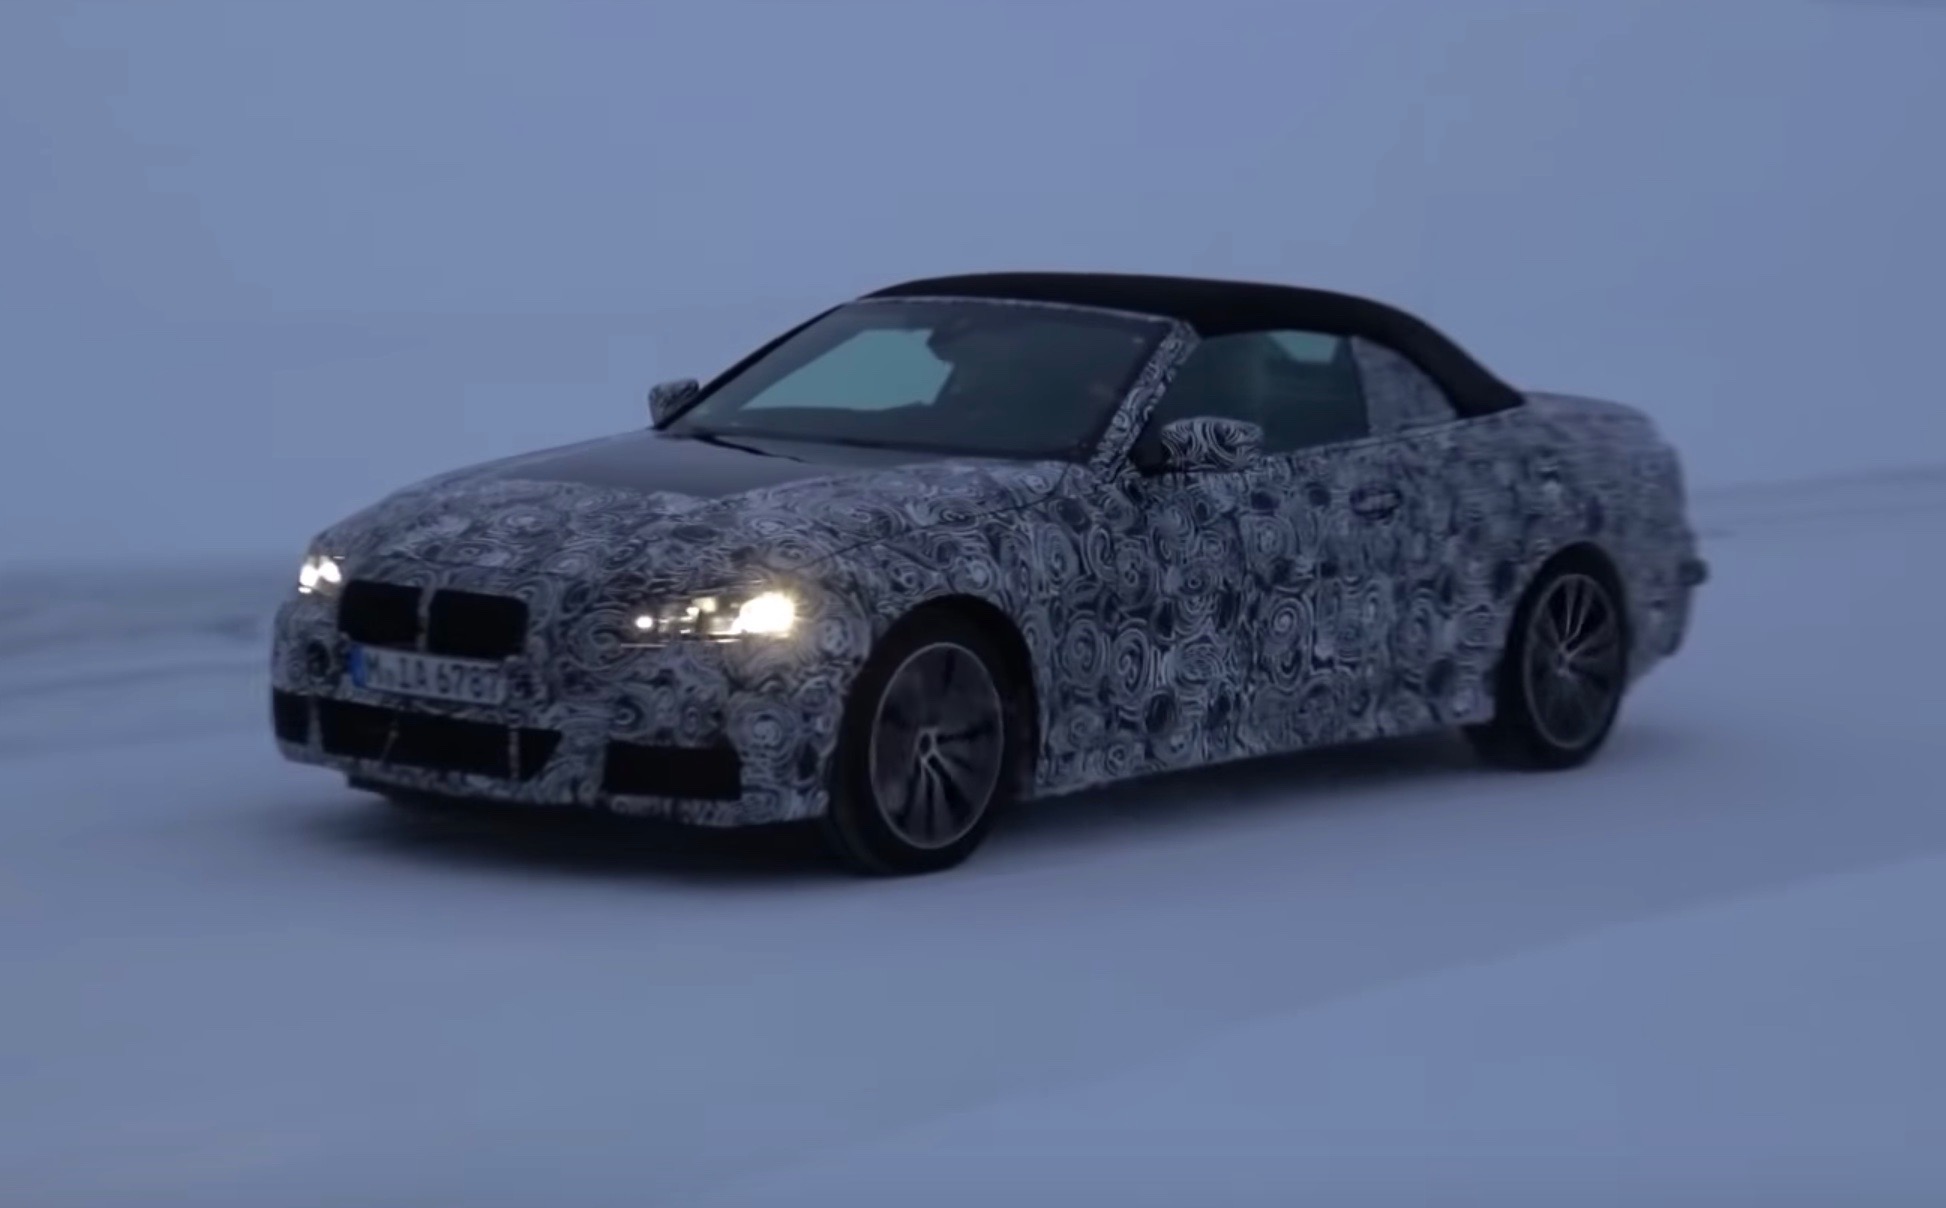 2020 BMW 4 Series convertible spotted, gets soft-top roof (video)